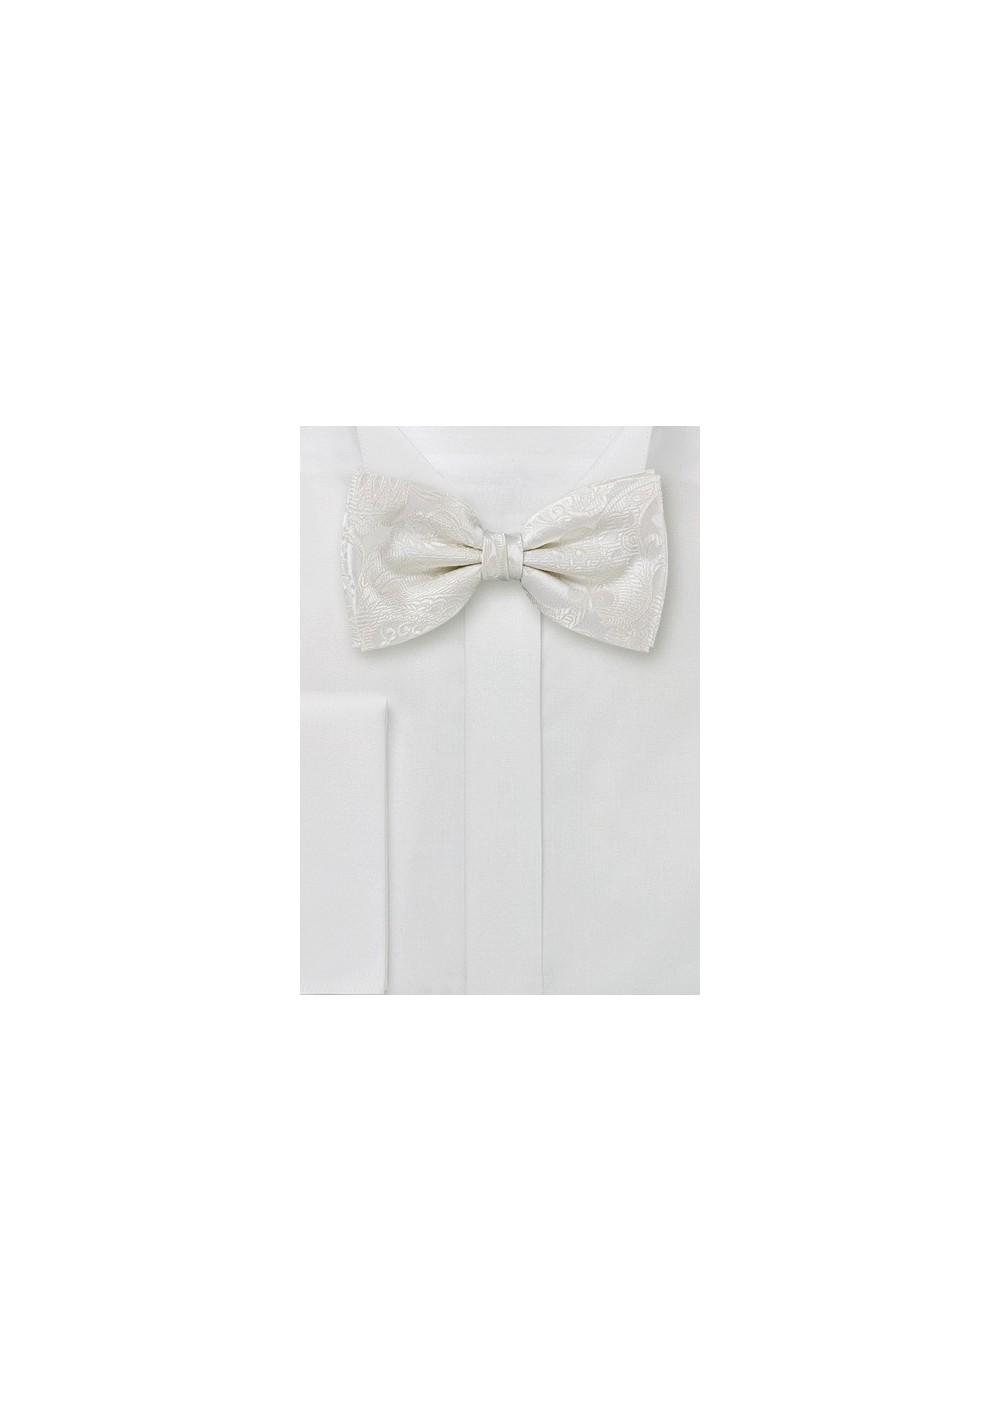 Ivory Patterned Bow Tie